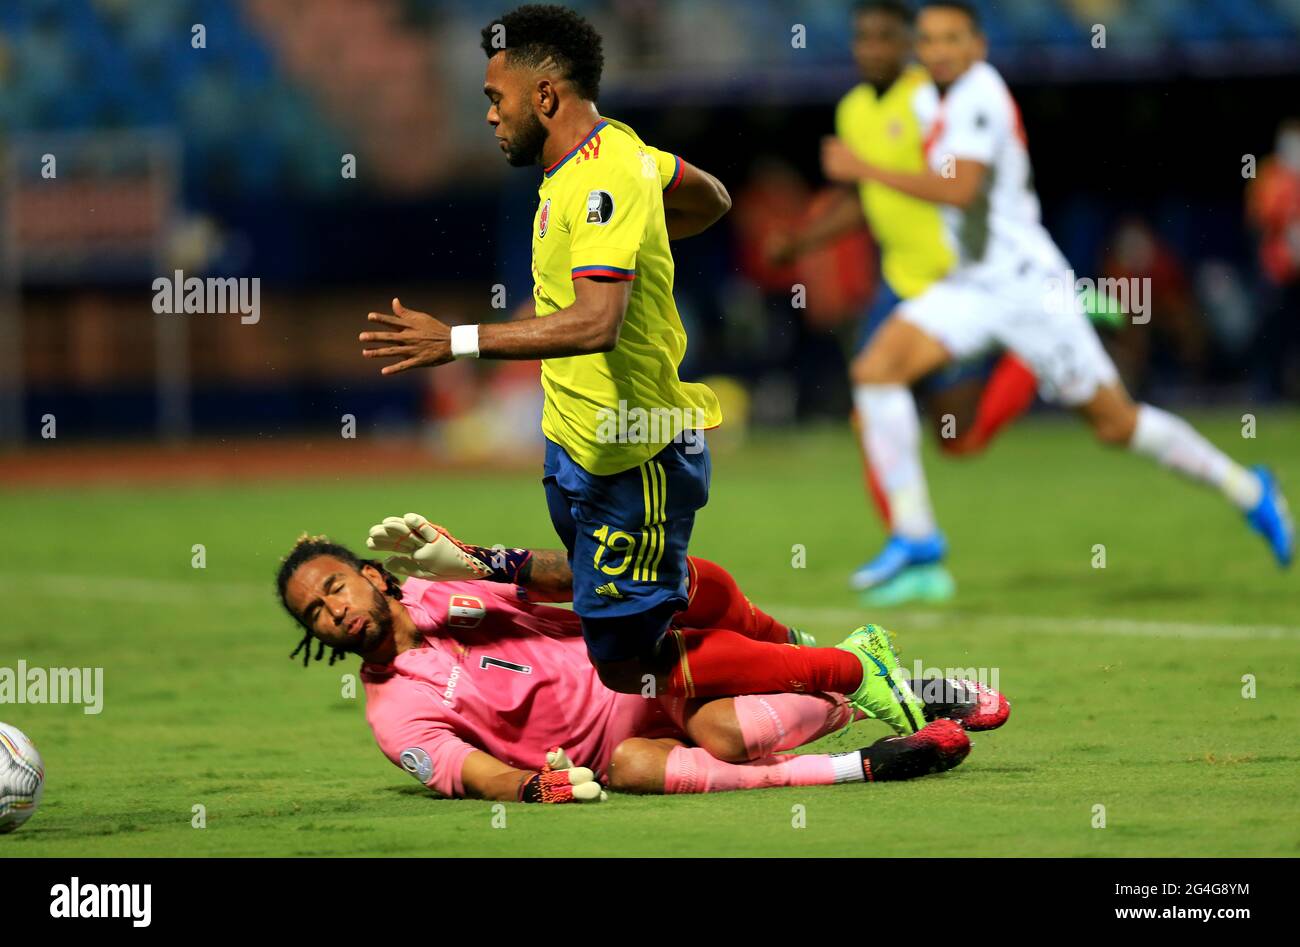 GOIANIA, BRAZIL - JUNE 20: Pedro Gallese of Peru commits a penalty foul on Miguel Borja of Colombia ,during the match between Colombia and Peru as part of Conmebol Copa America Brazil 2021 at Estadio Olimpico on June 20, 2021 in Goiania, Brazil. (MB Media) Stock Photo